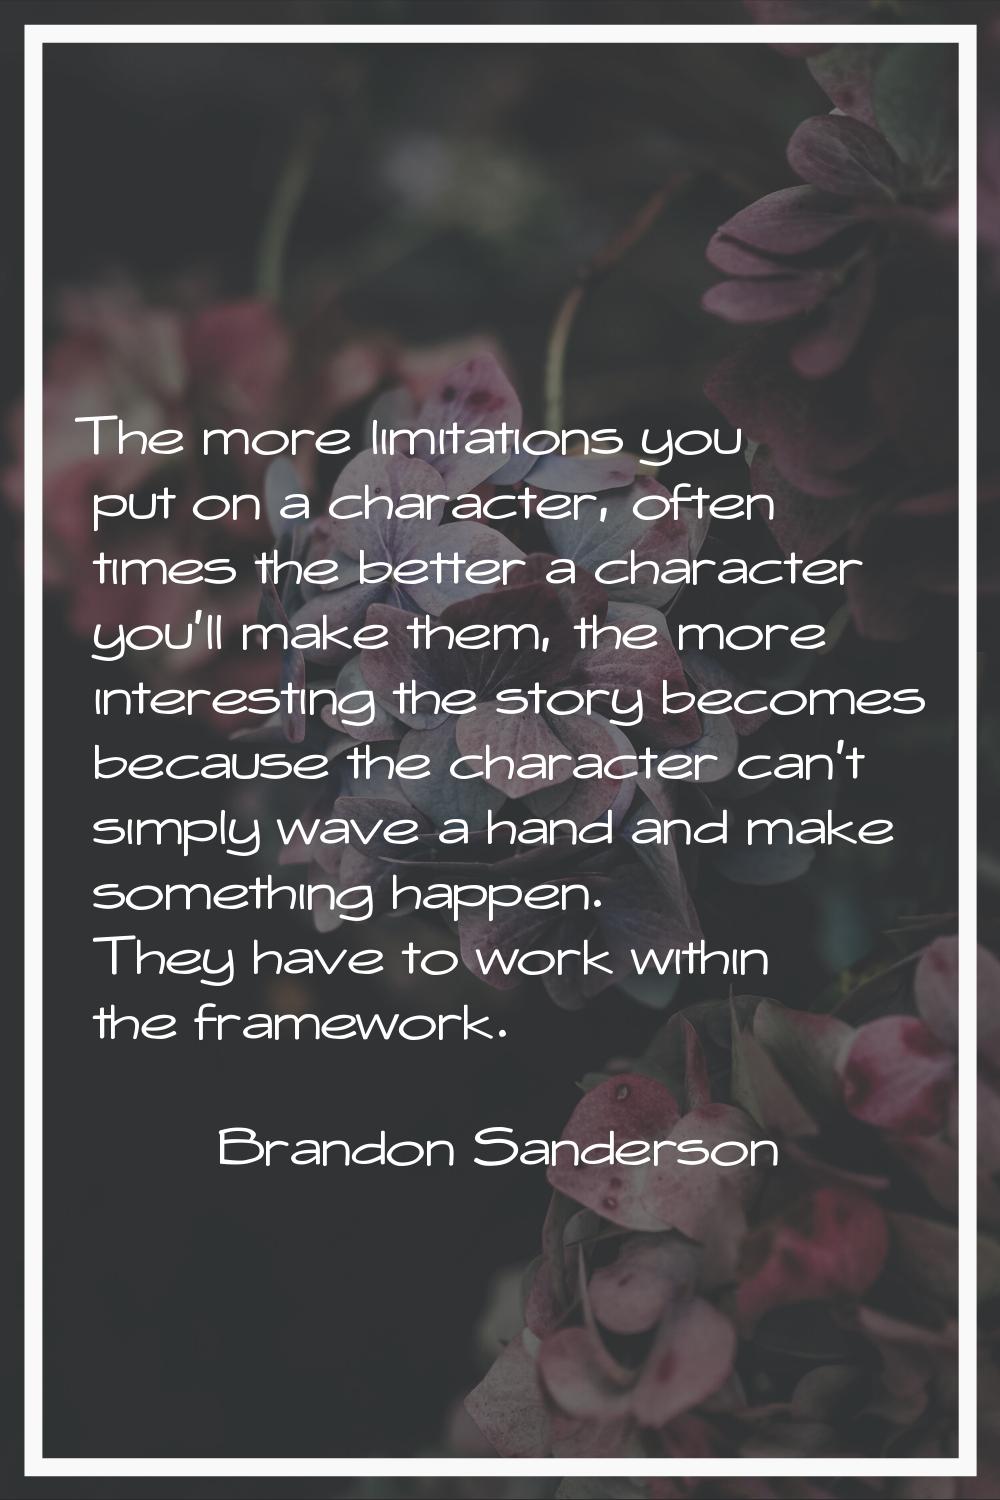 The more limitations you put on a character, often times the better a character you'll make them, t